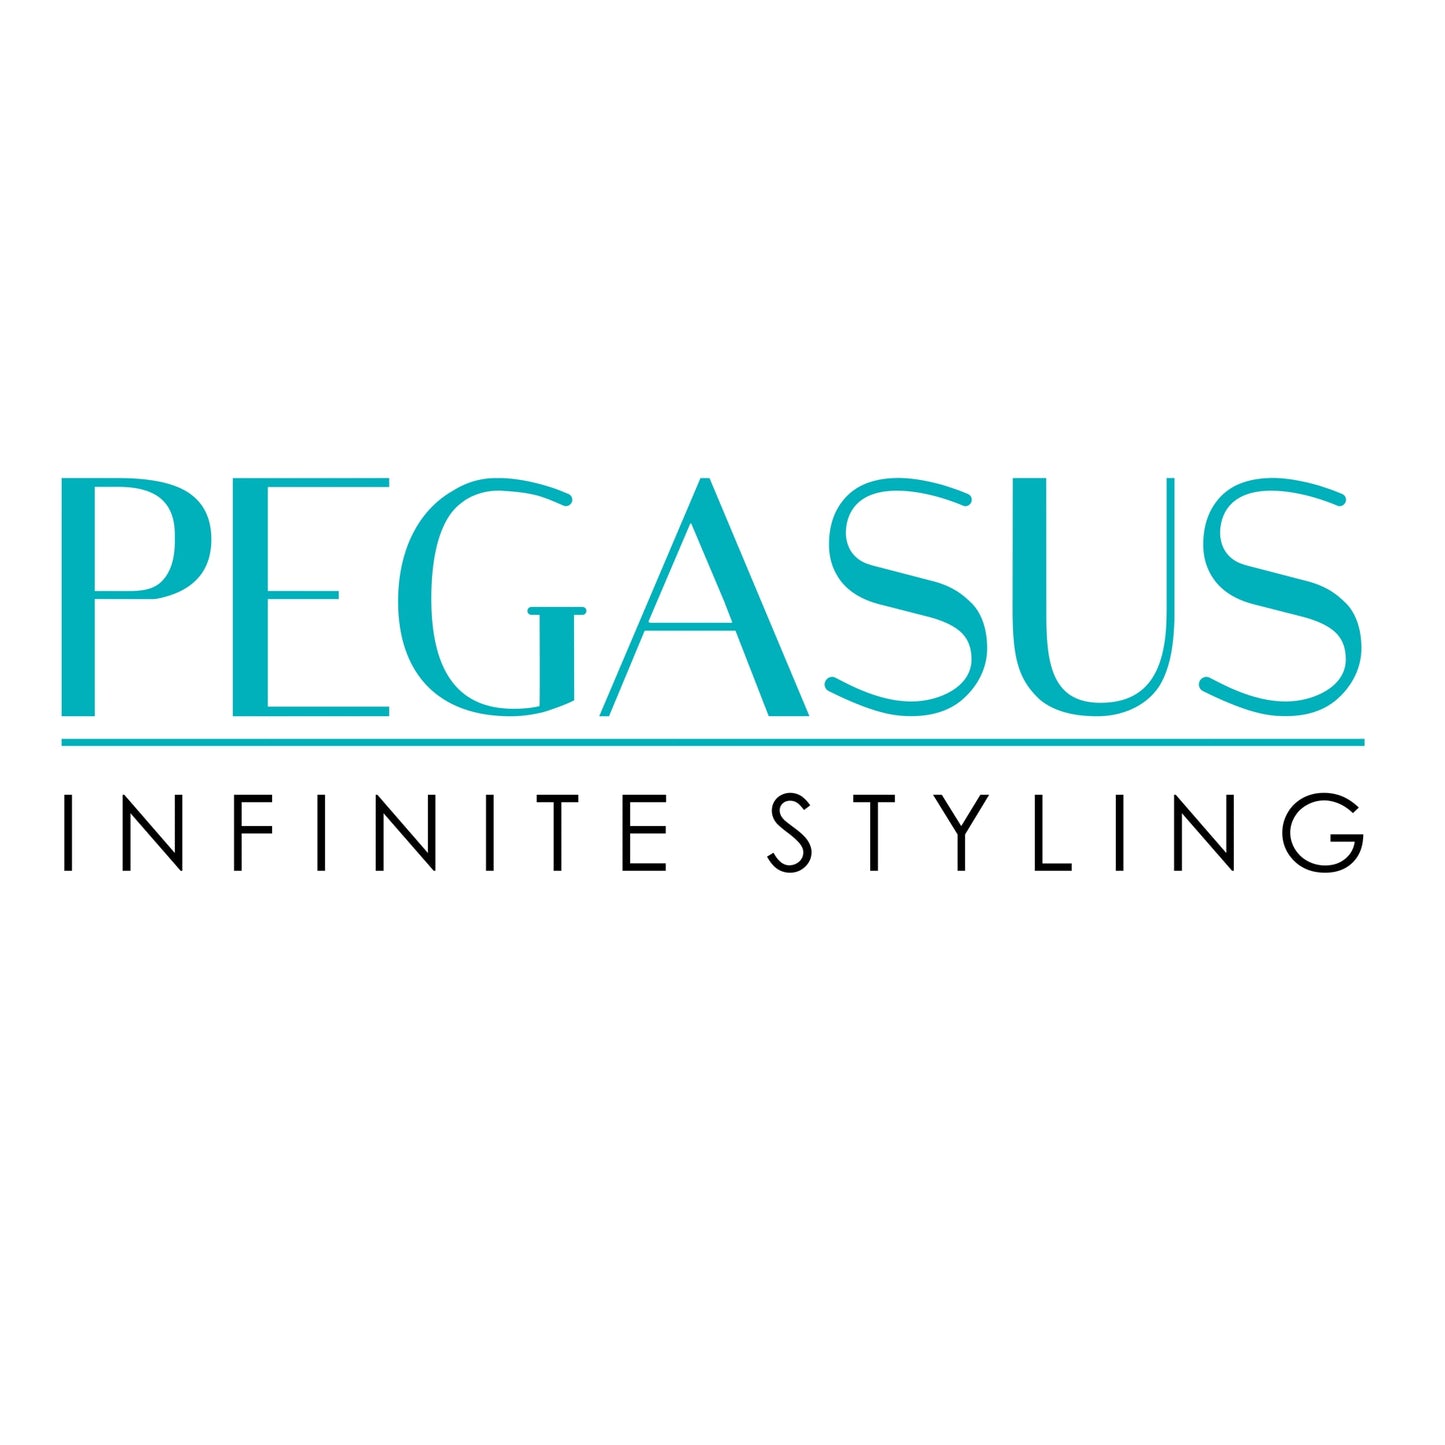 Pegasus 601, 3.5in Hard Rubber Lice Comb, Handmade, Seamless, Smooth Edges, Anti Static, Heat and Chemically Resistant Comb | Peines de goma dura - Black